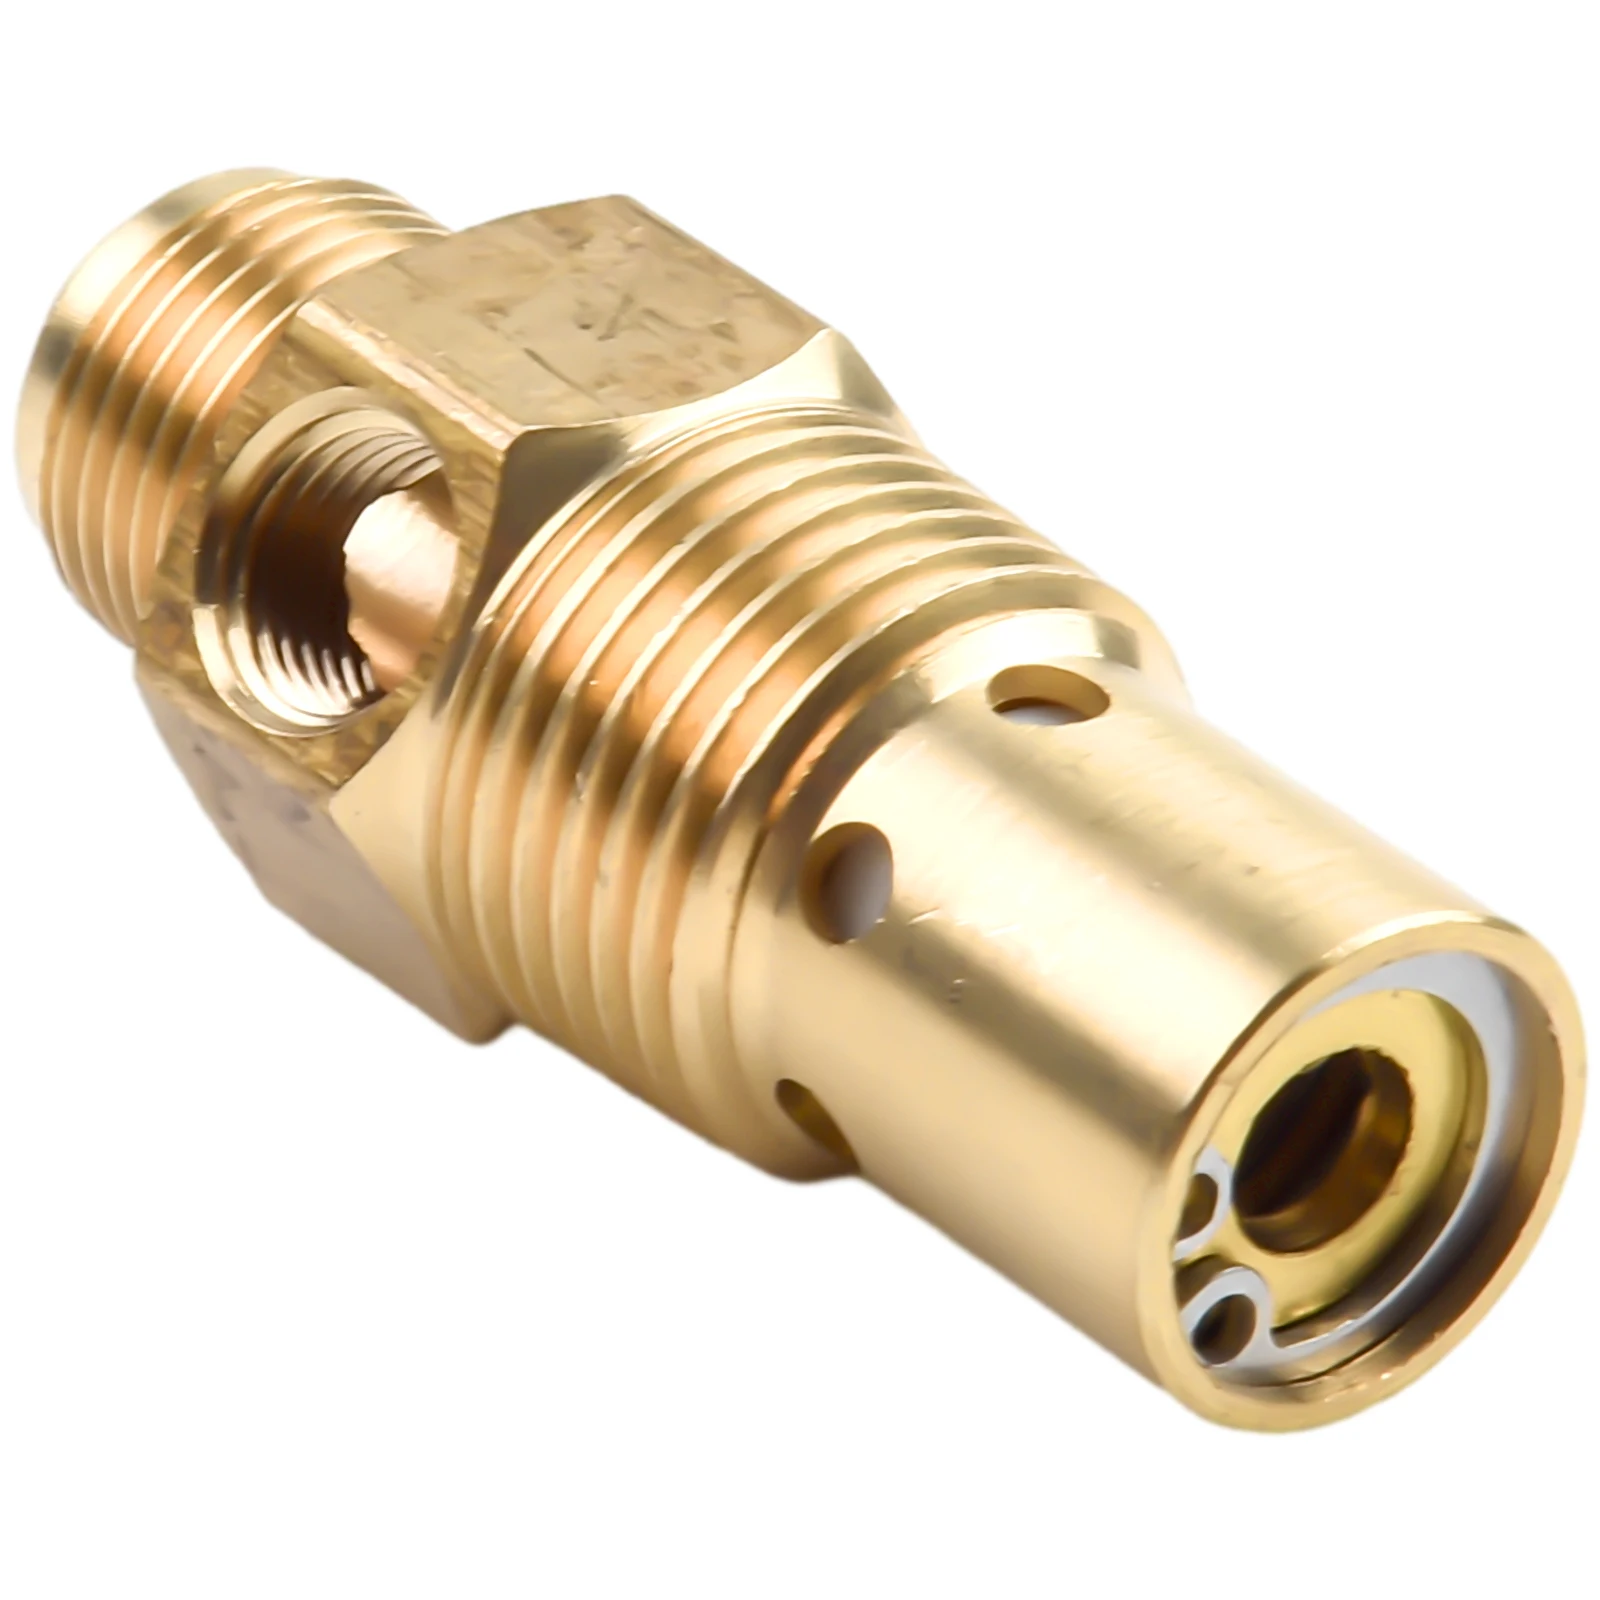 Brass Check Valve G3/8 Air Compressor Male Threaded NPT×1/2In For Air Compressor Replacement Radiator Check Valve male elbow check valve 1 4 od x 1 8 thread male quick connect fitting parts for water filters ro systems pack of 2